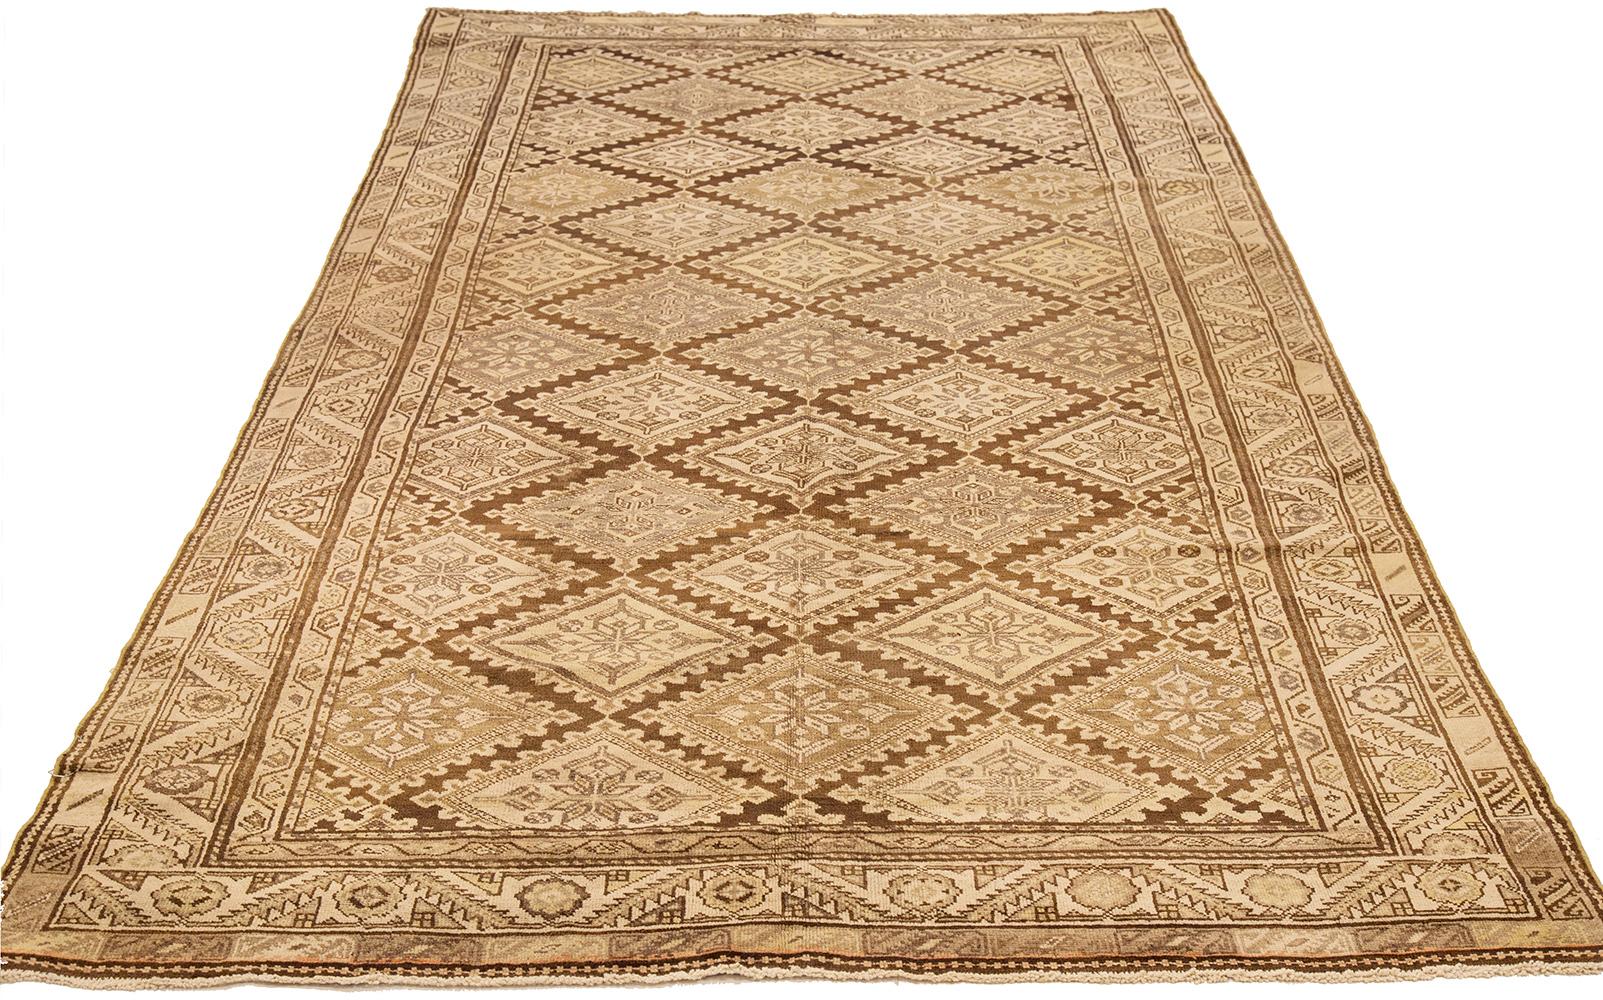 Antique Persian rug handwoven from the finest sheep’s wool and colored with all-natural vegetable dyes that are safe for humans and pets. It’s a traditional Farahan weaving featuring a lovely ensemble of tribal details in ivory medallions over a